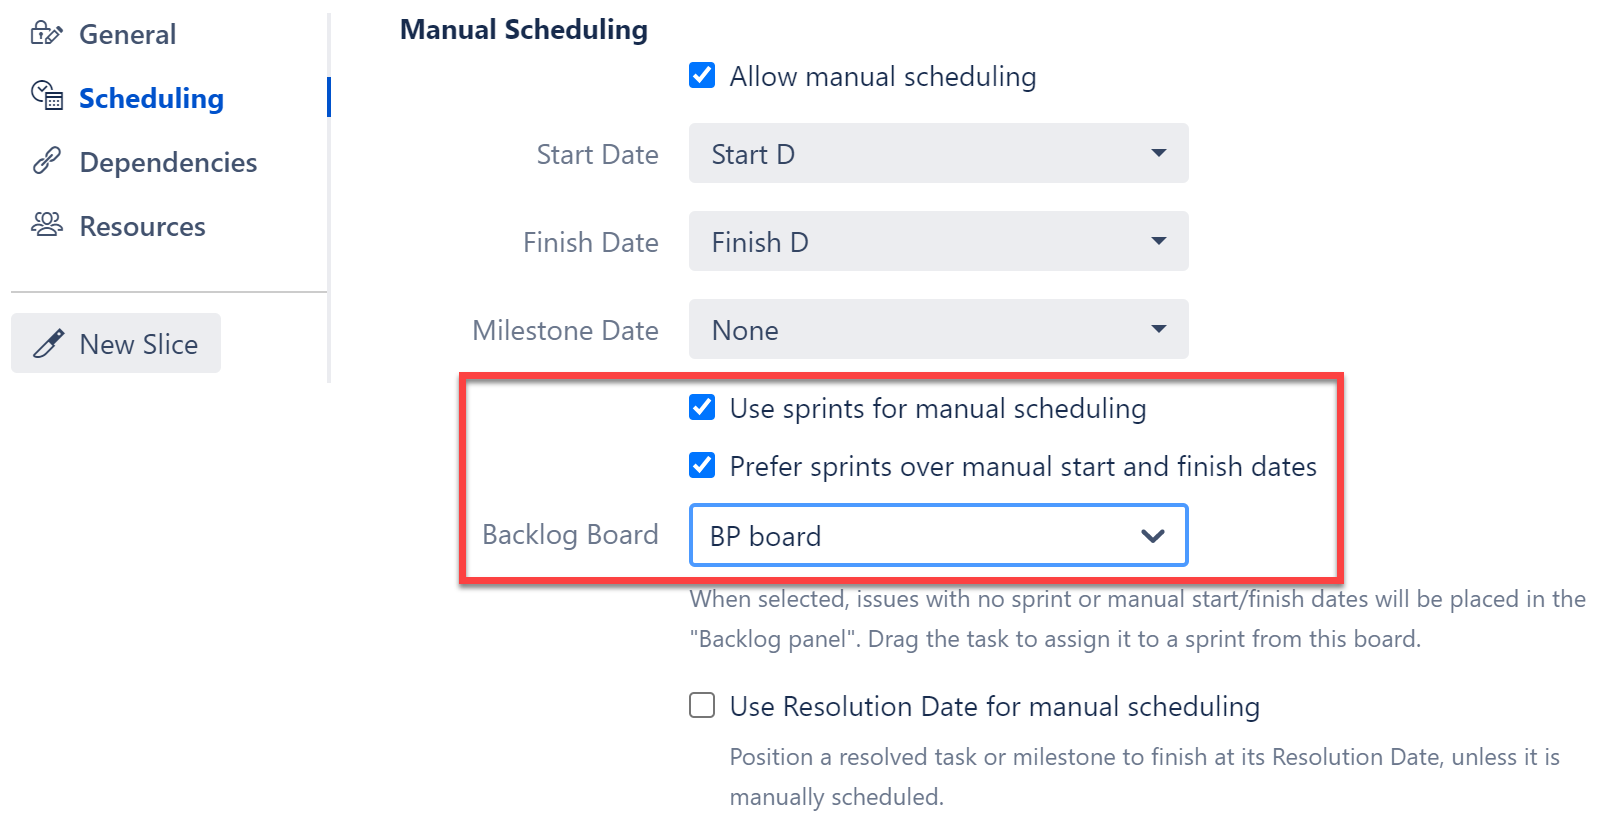 Configuration for sprint-based scheduling